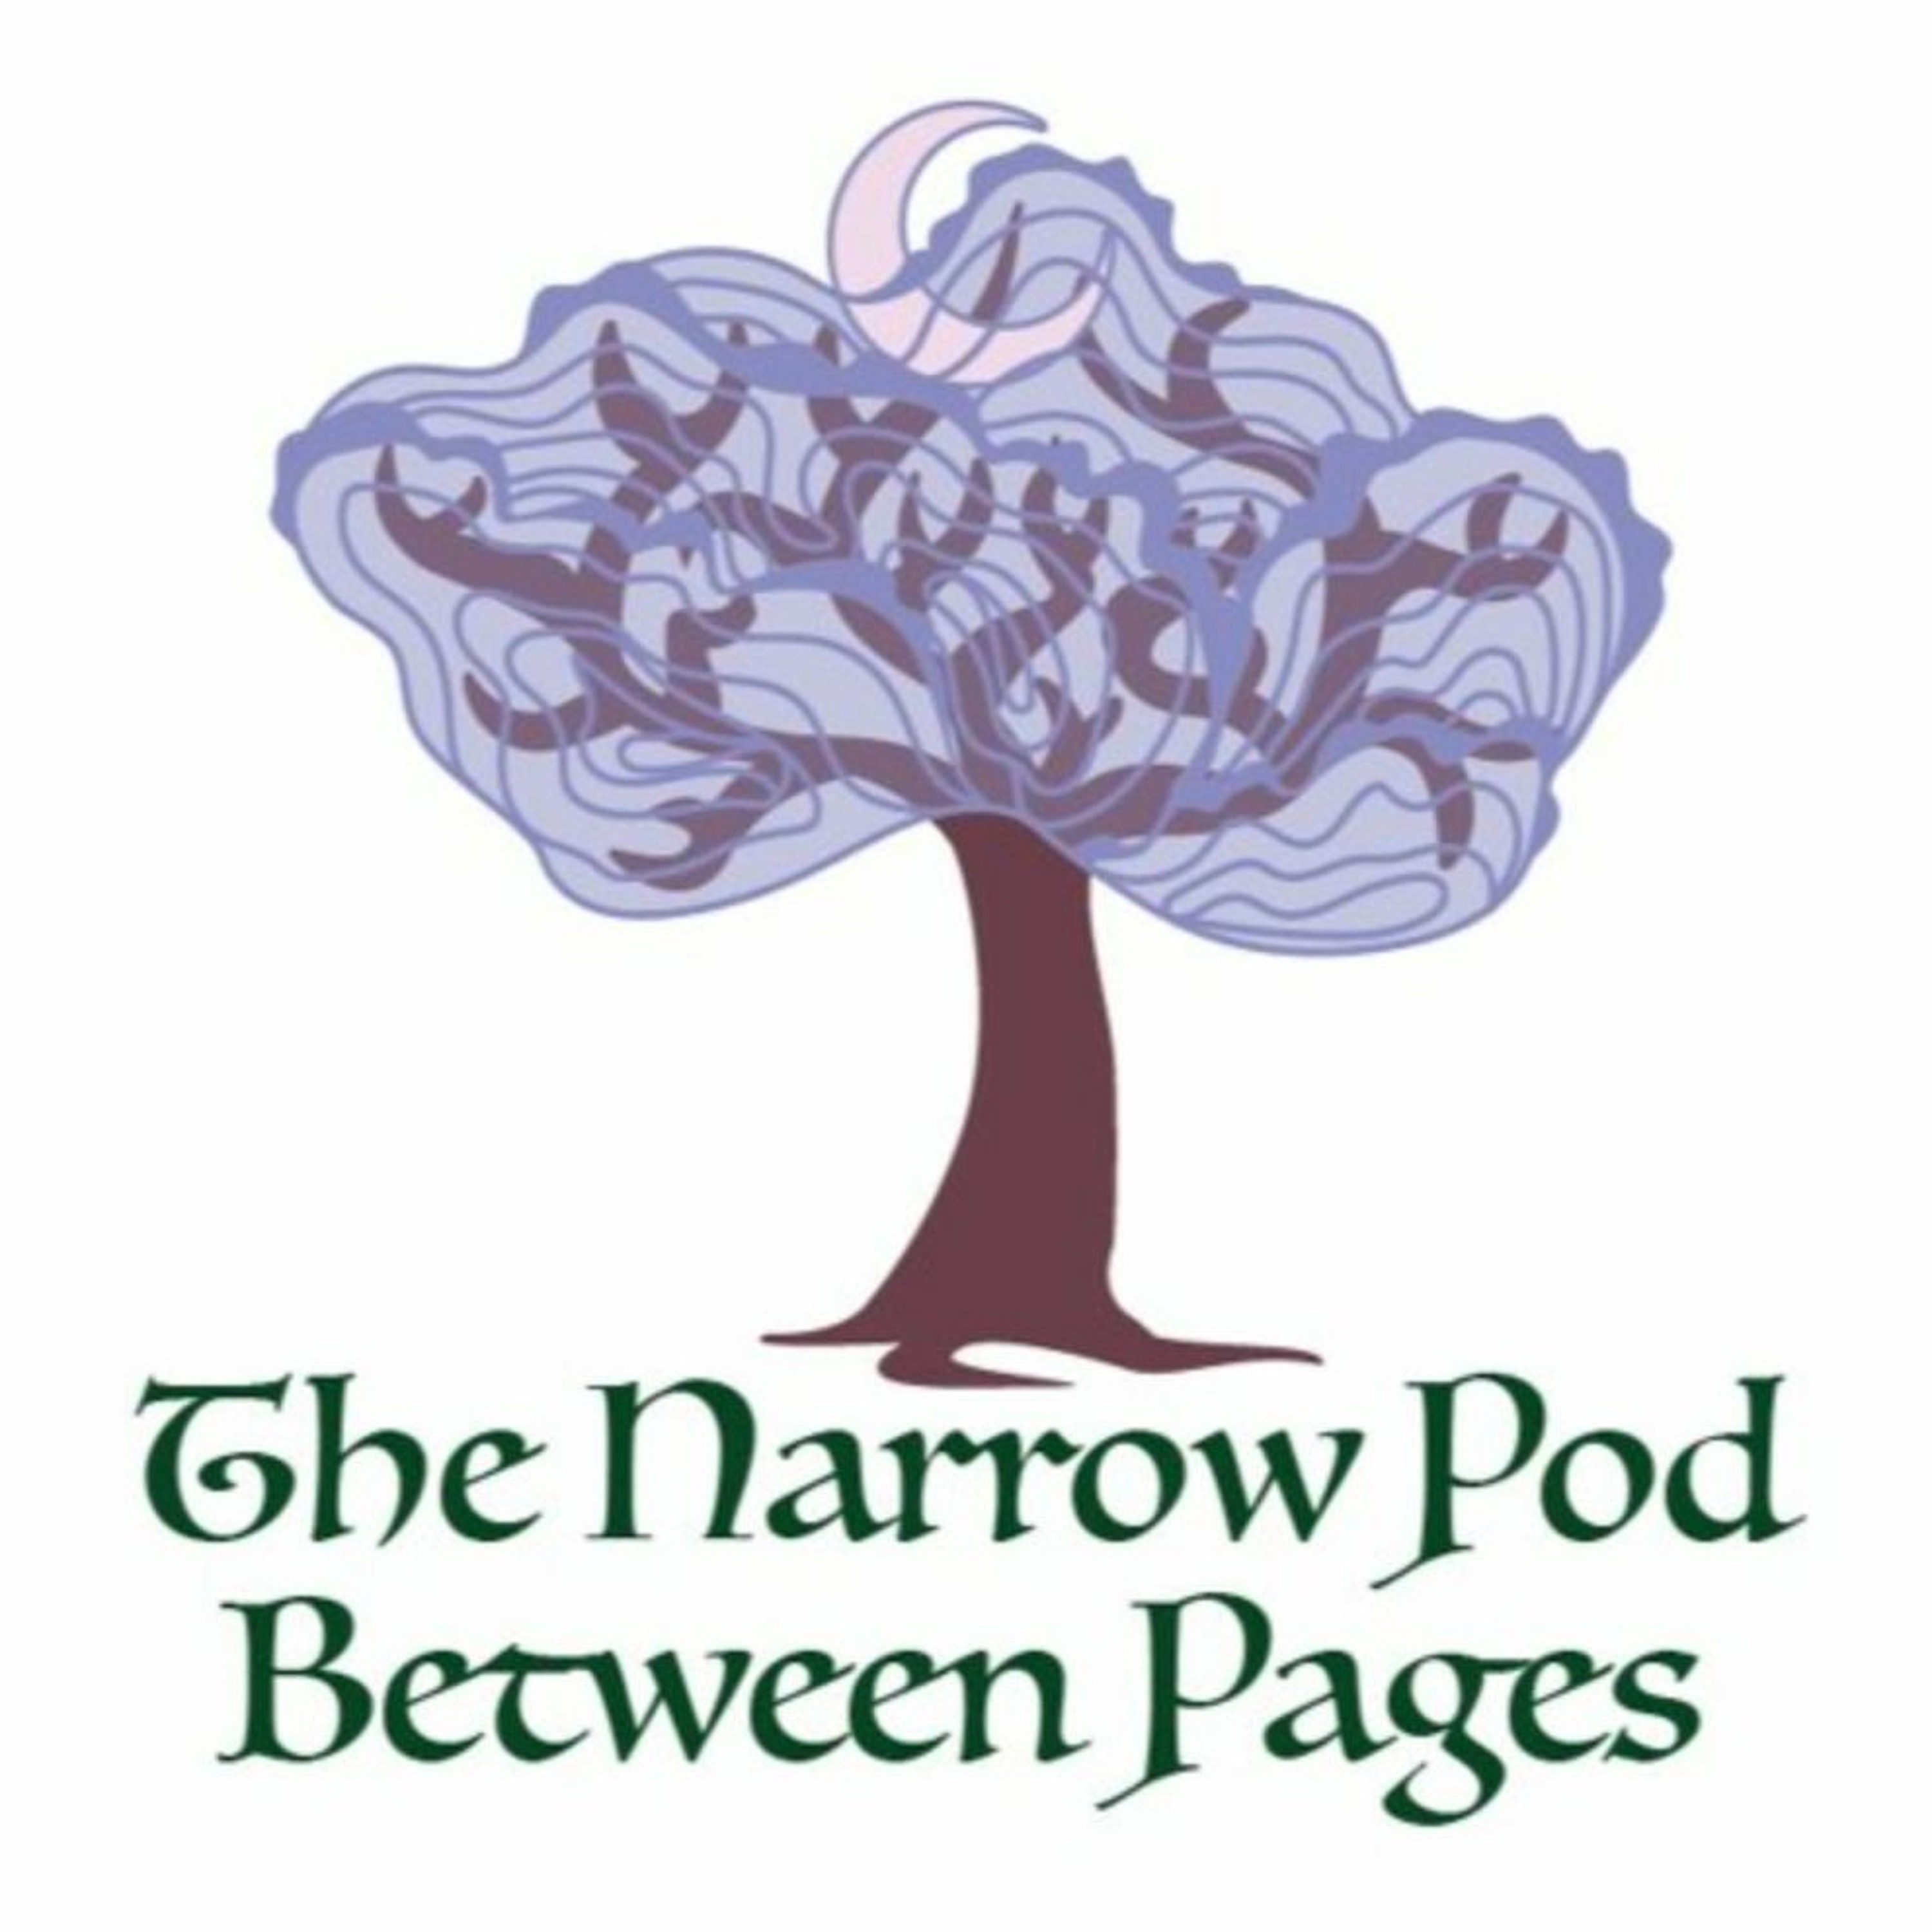 The Narrow Pod Between Pages - Page 201: CRICKETS ARE THE KEY!!!